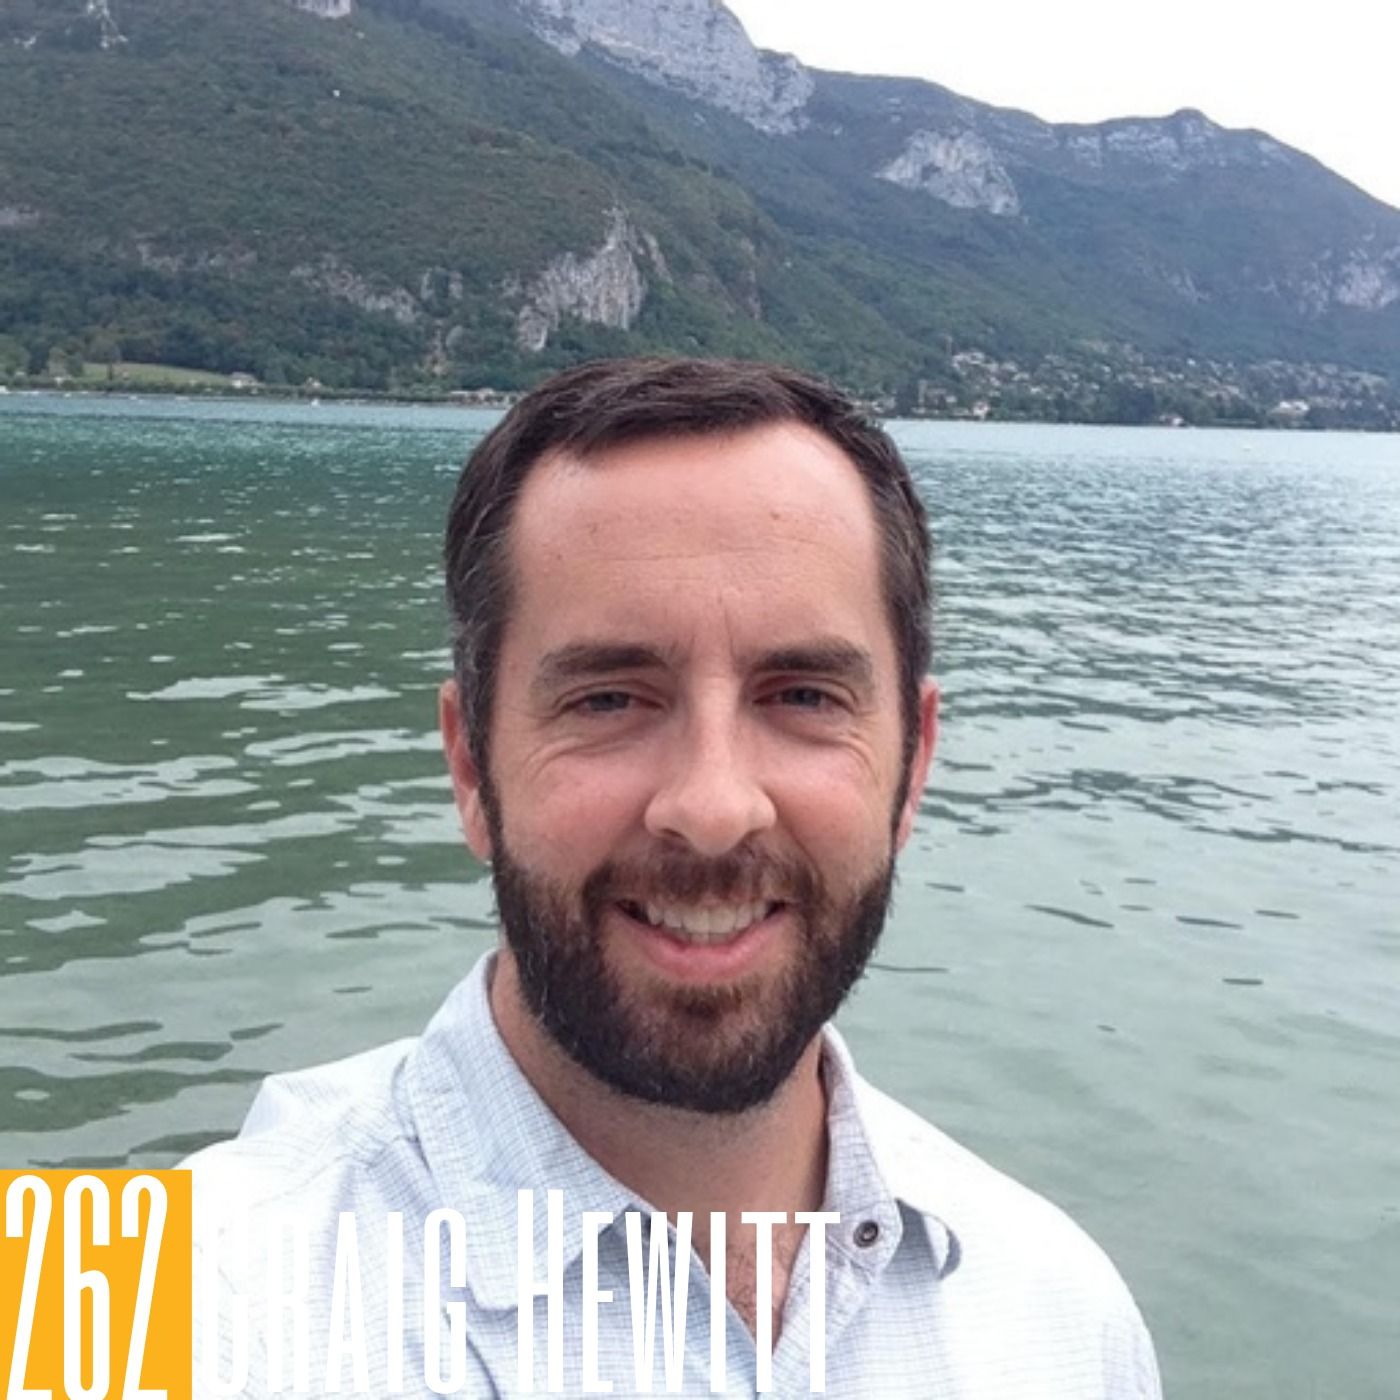 262 Craig Hewitt - On a Mission to Create Impactful Podcasts